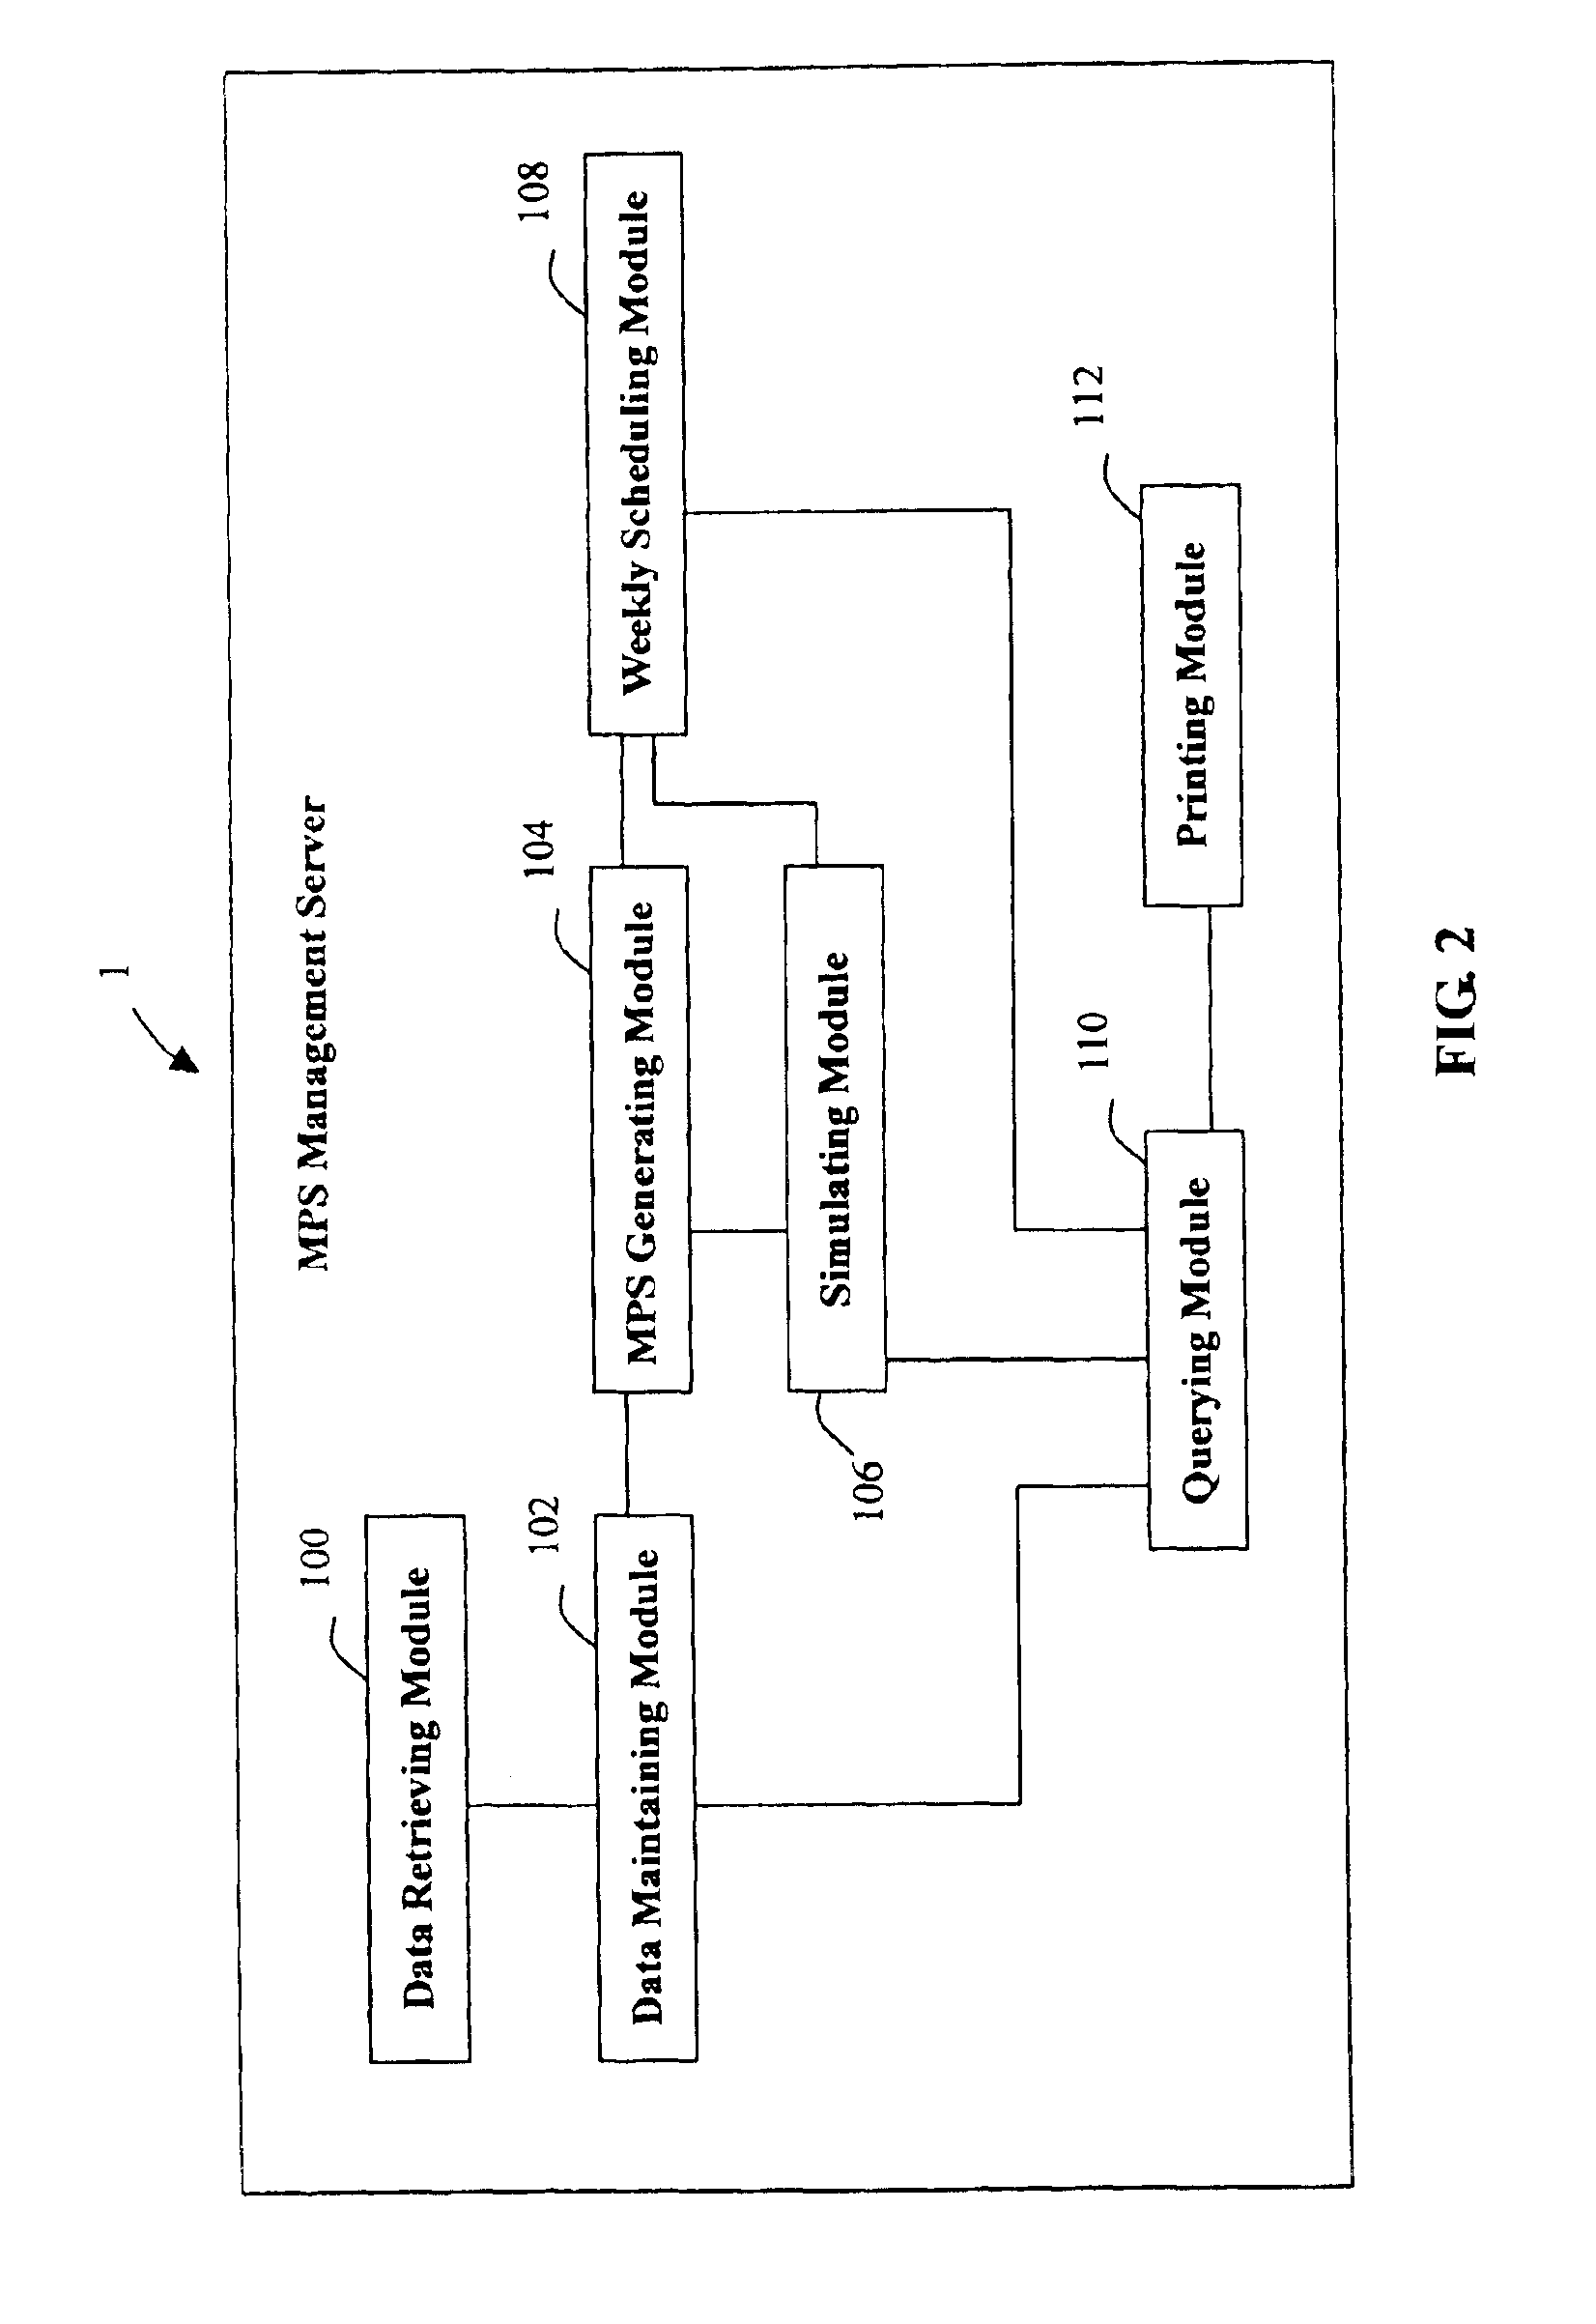 Master production scheduling management system and method